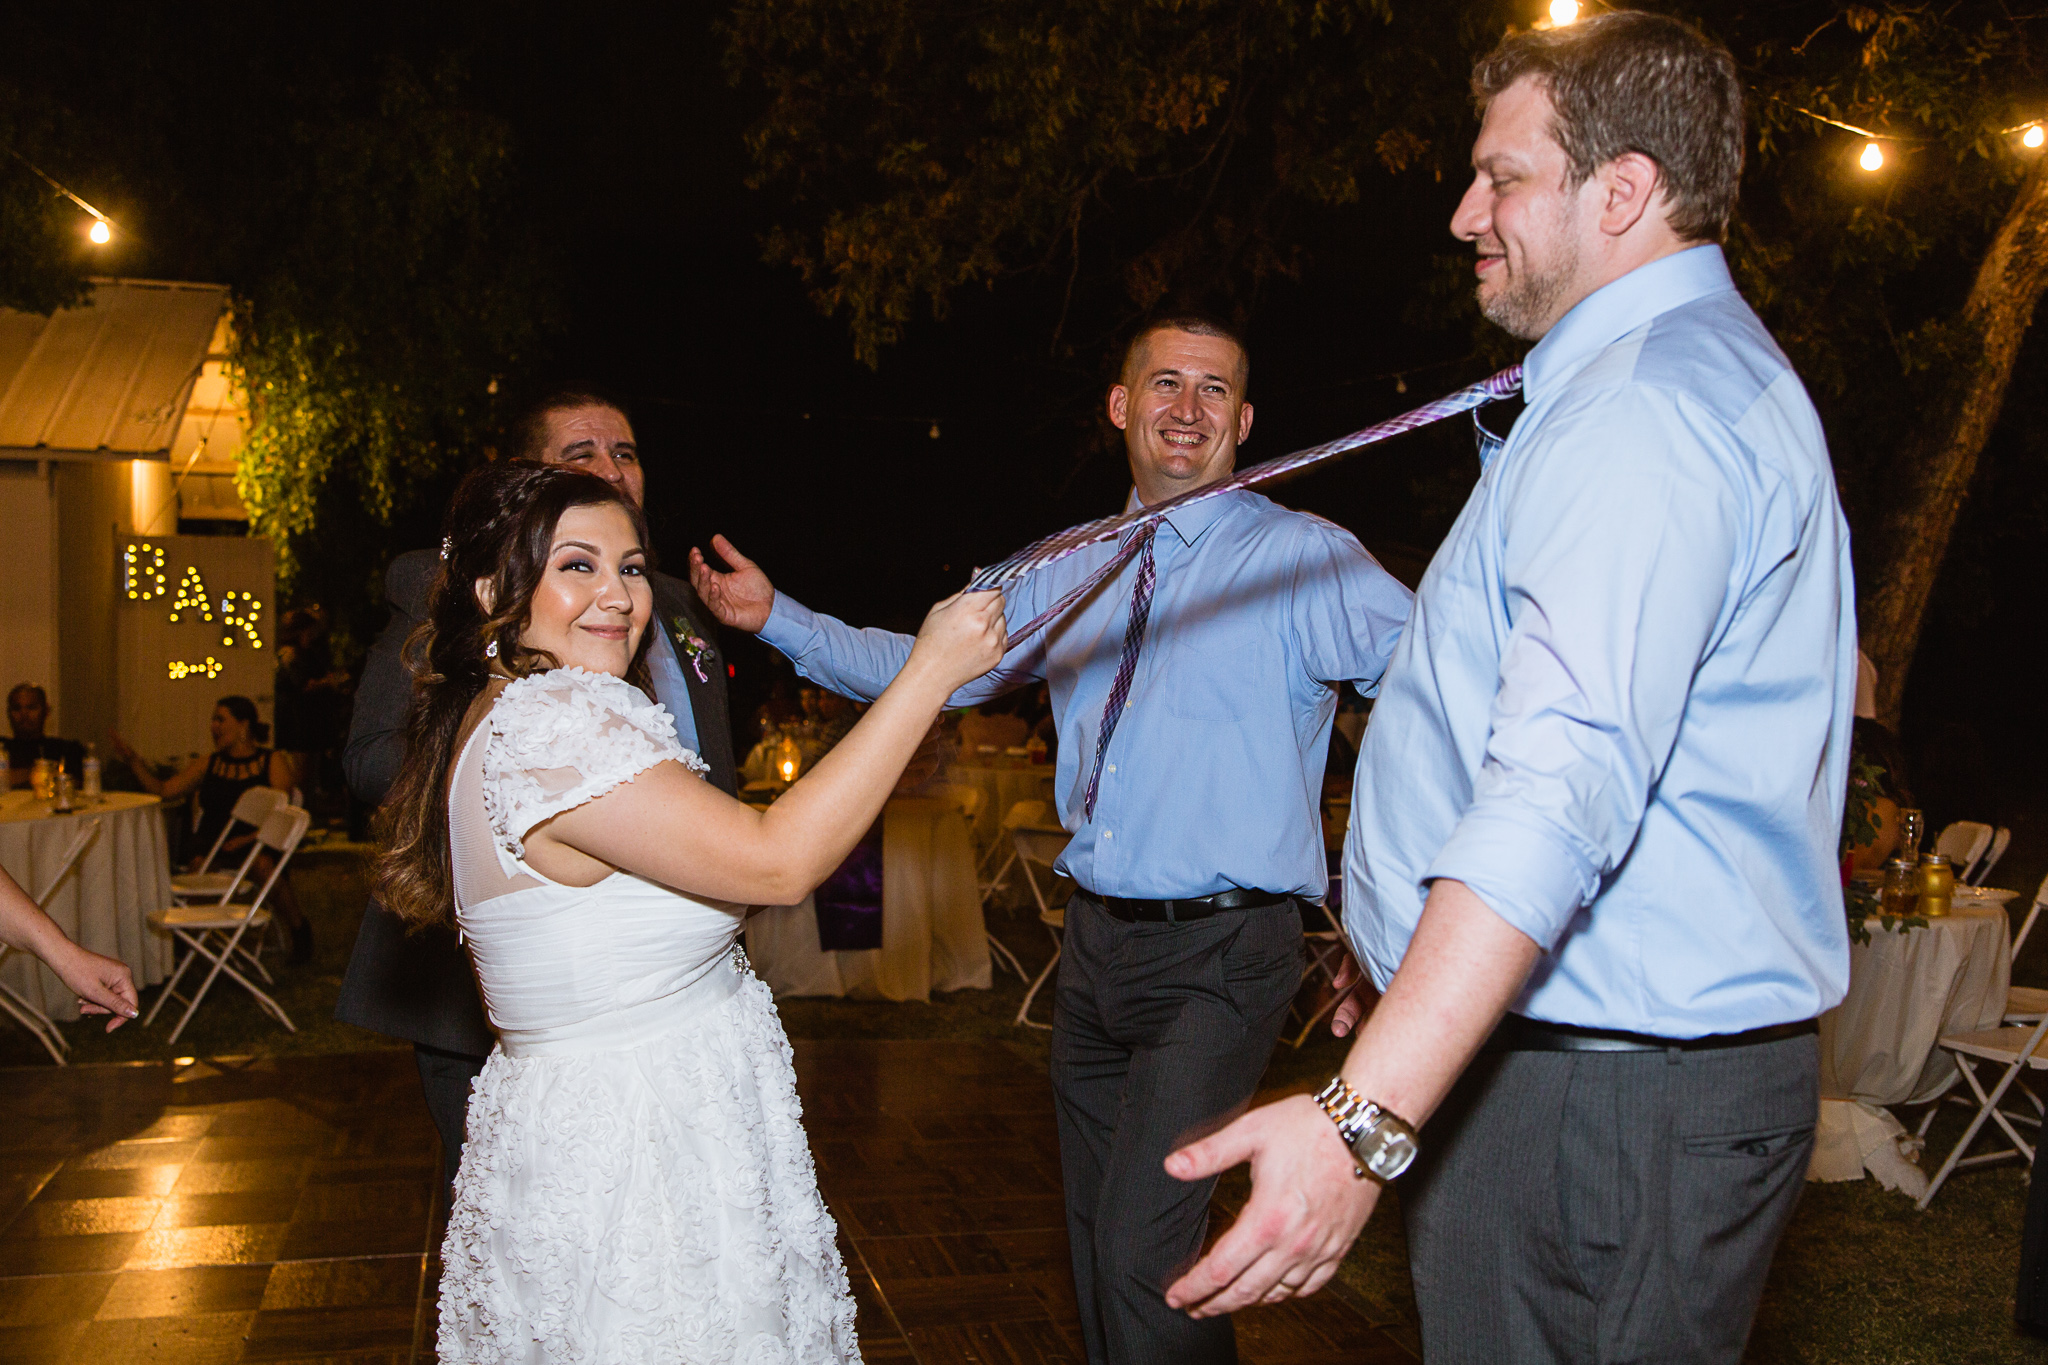 Bride dancing with groomsmen at wedding reception by PMA Photography.